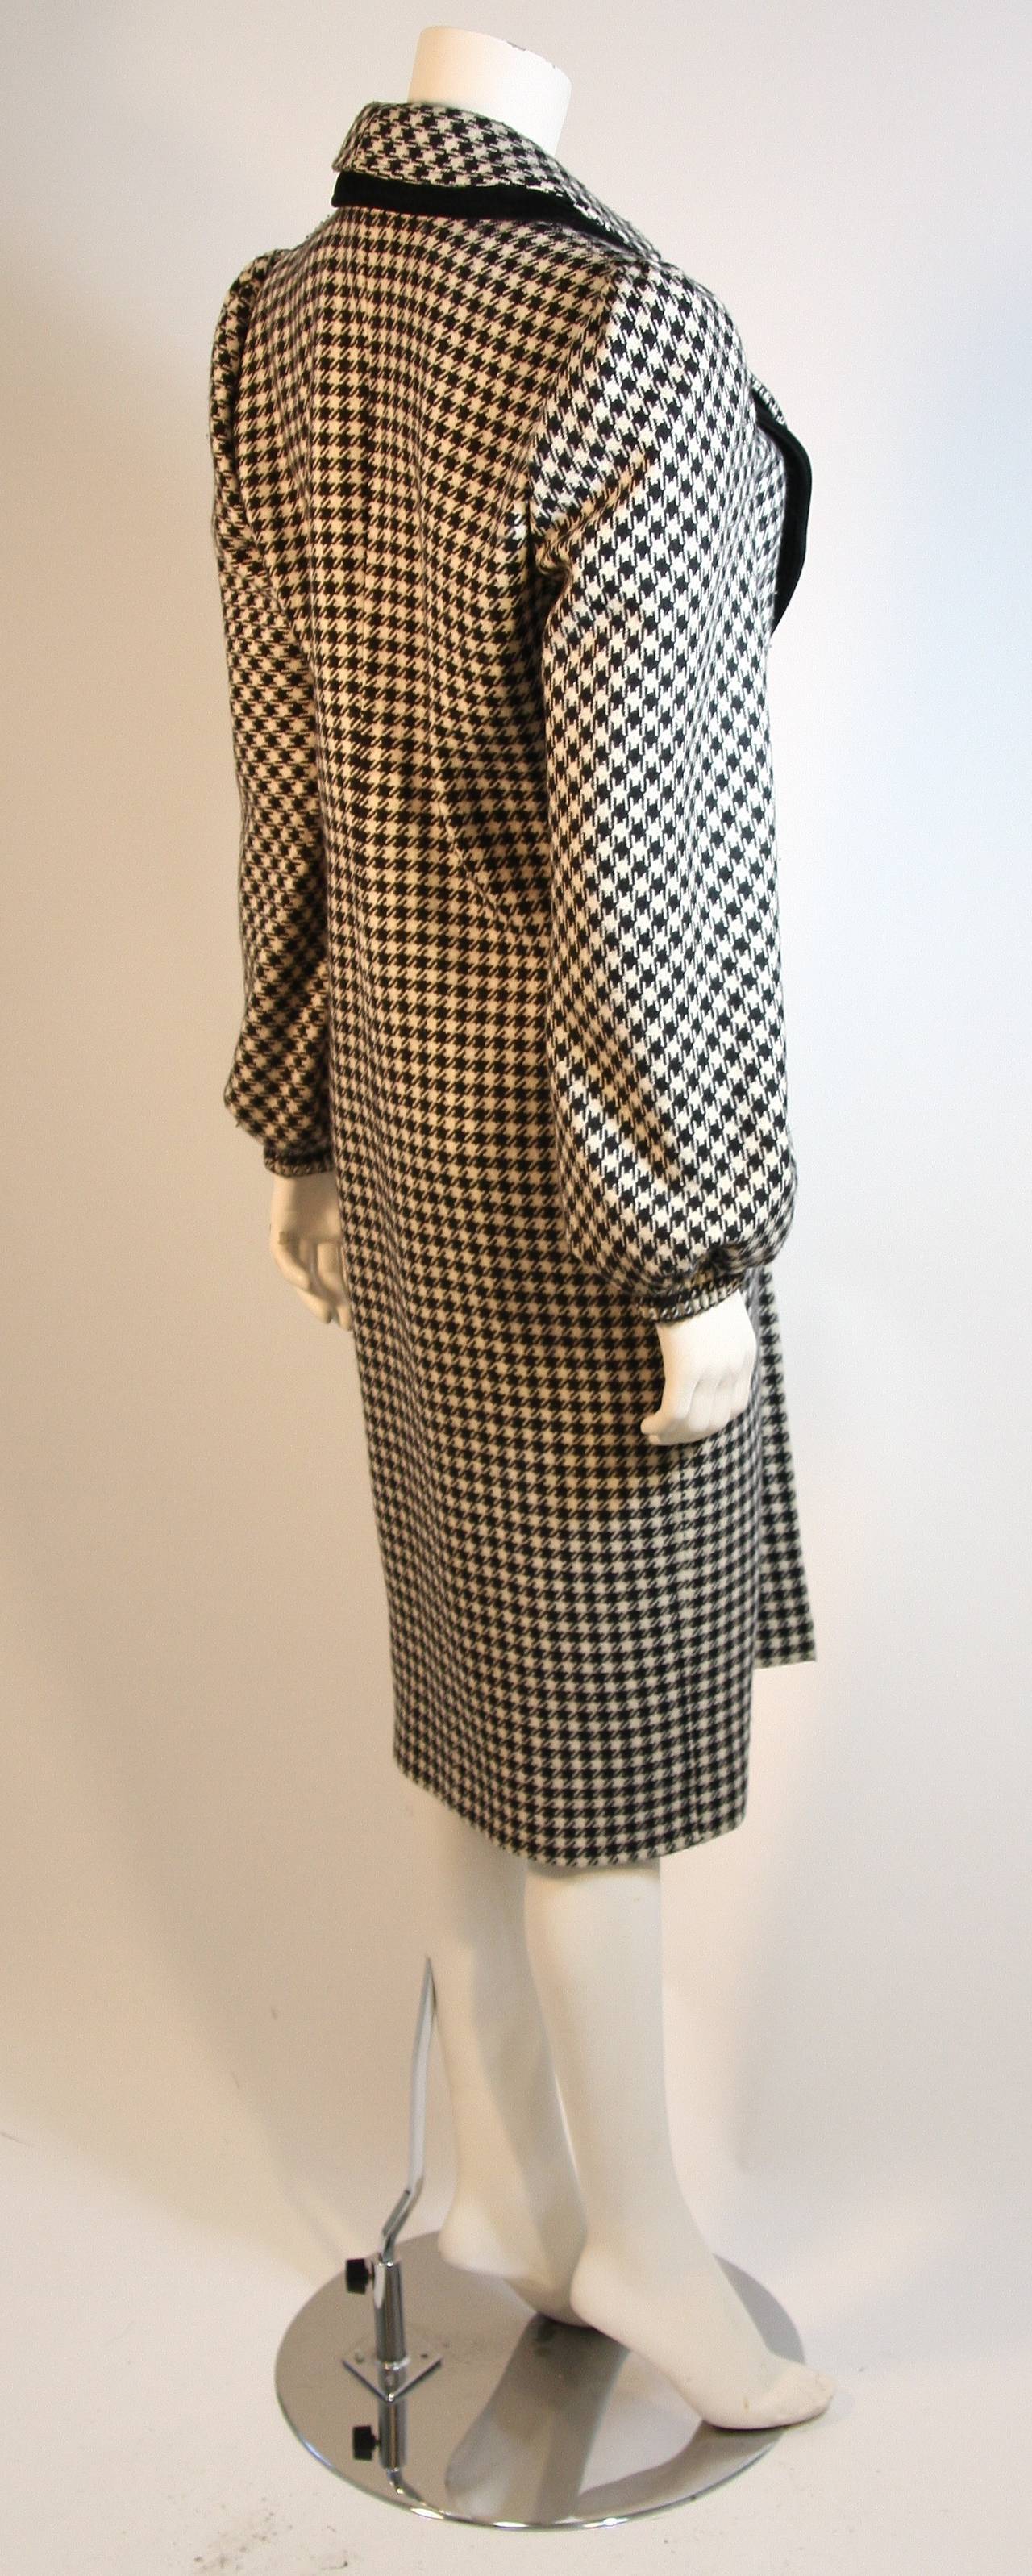 Valentino Houndstooth Coat with Velvet Accents 2